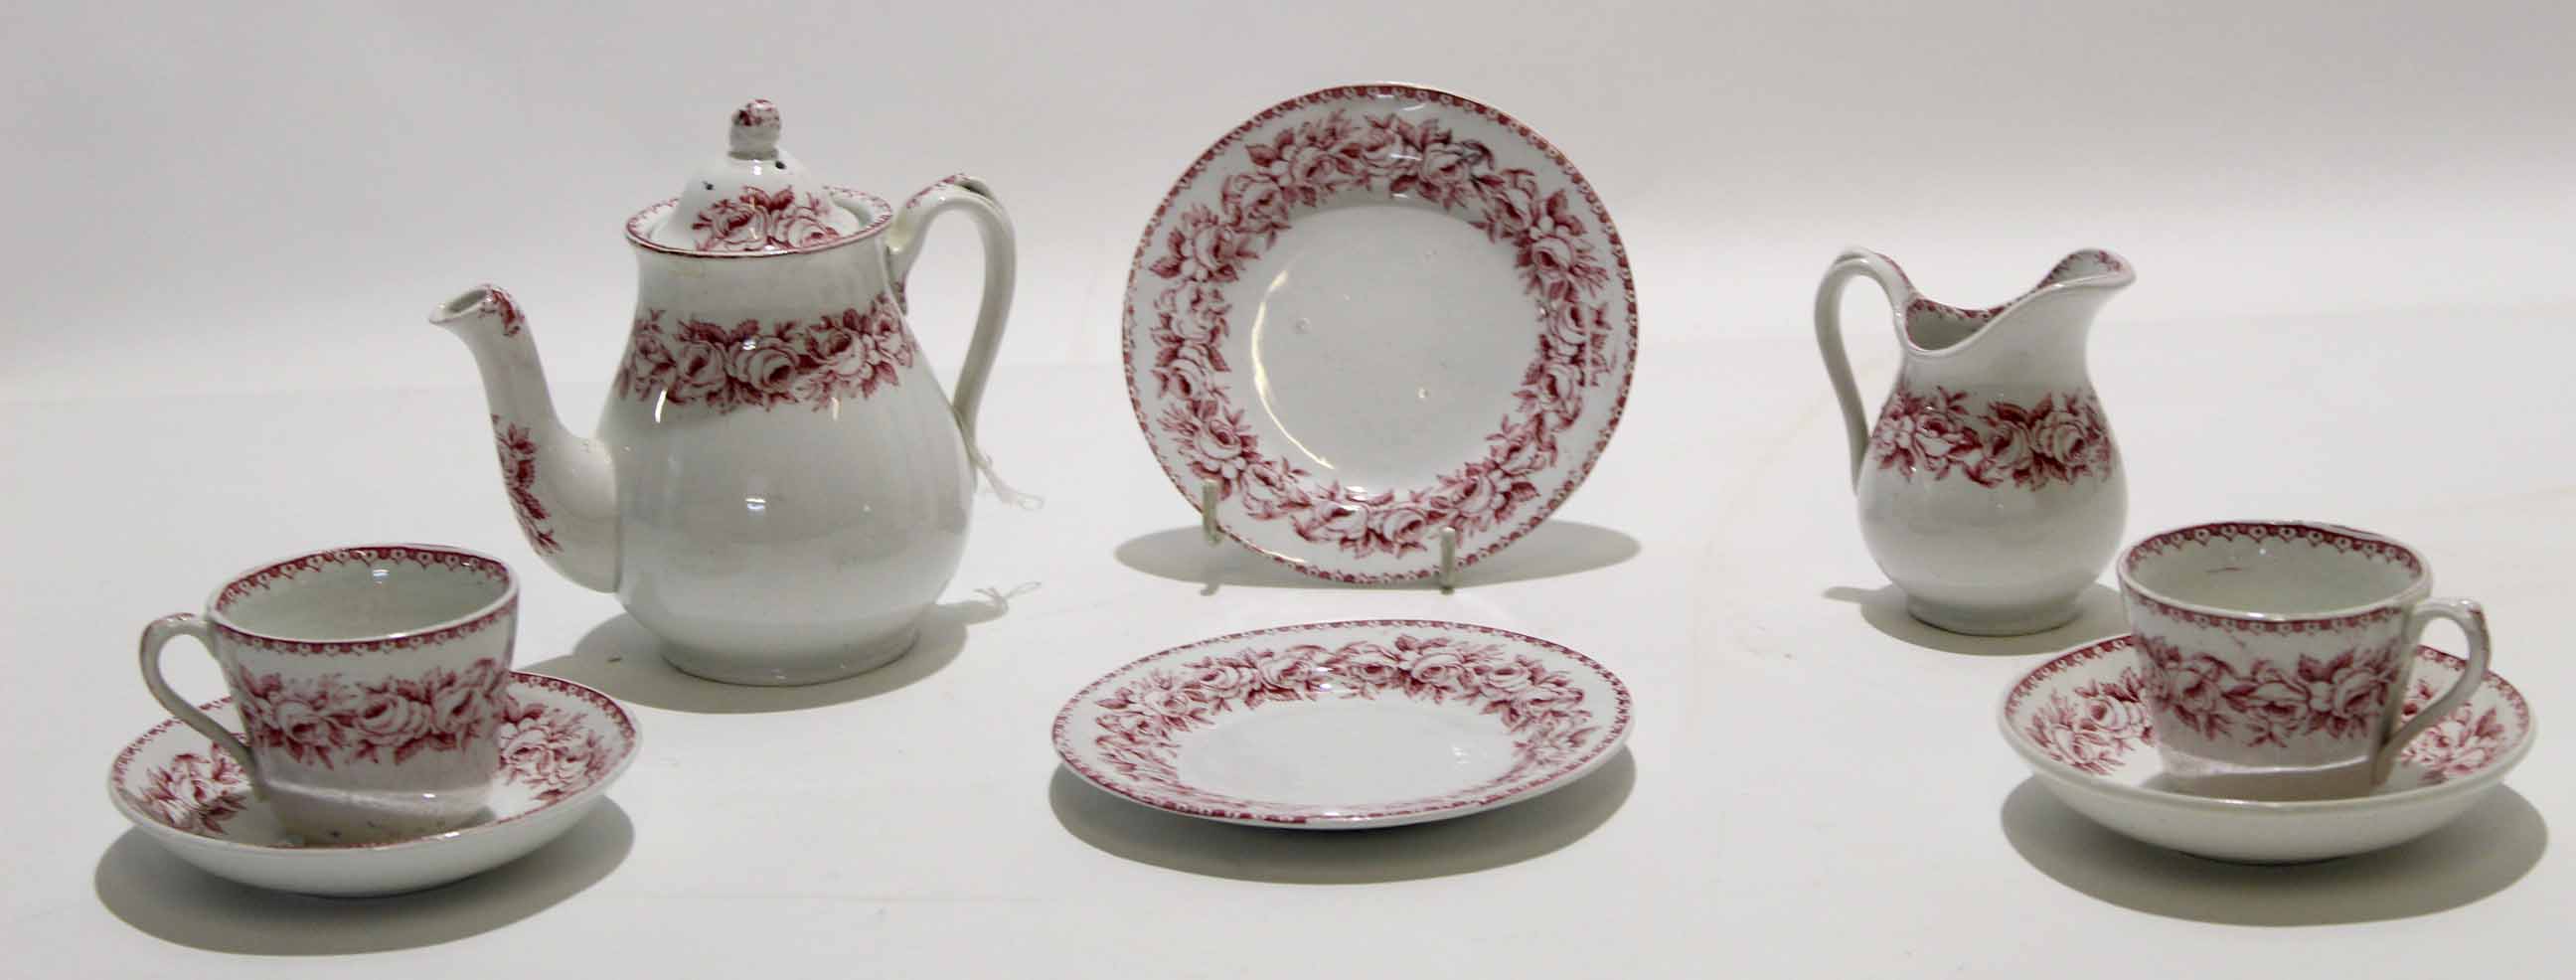 Late 19th century miniature tea set comprising tea pot and milk jug and two cups and saucers, and